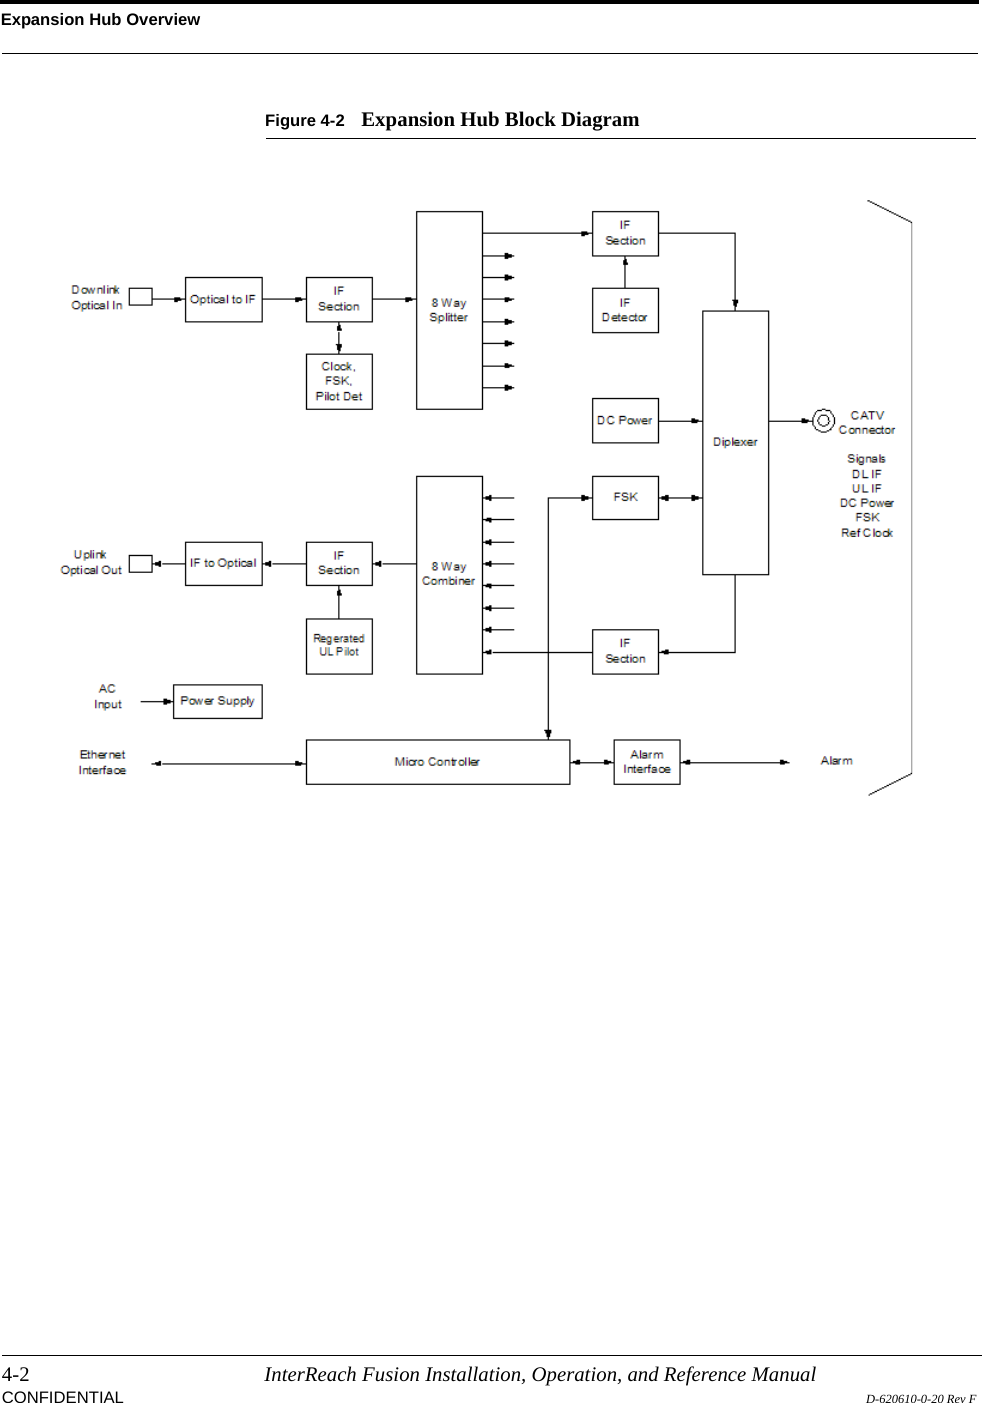 Expansion Hub Overview4-2 InterReach Fusion Installation, Operation, and Reference ManualCONFIDENTIAL D-620610-0-20 Rev FFigure 4-2 Expansion Hub Block Diagram